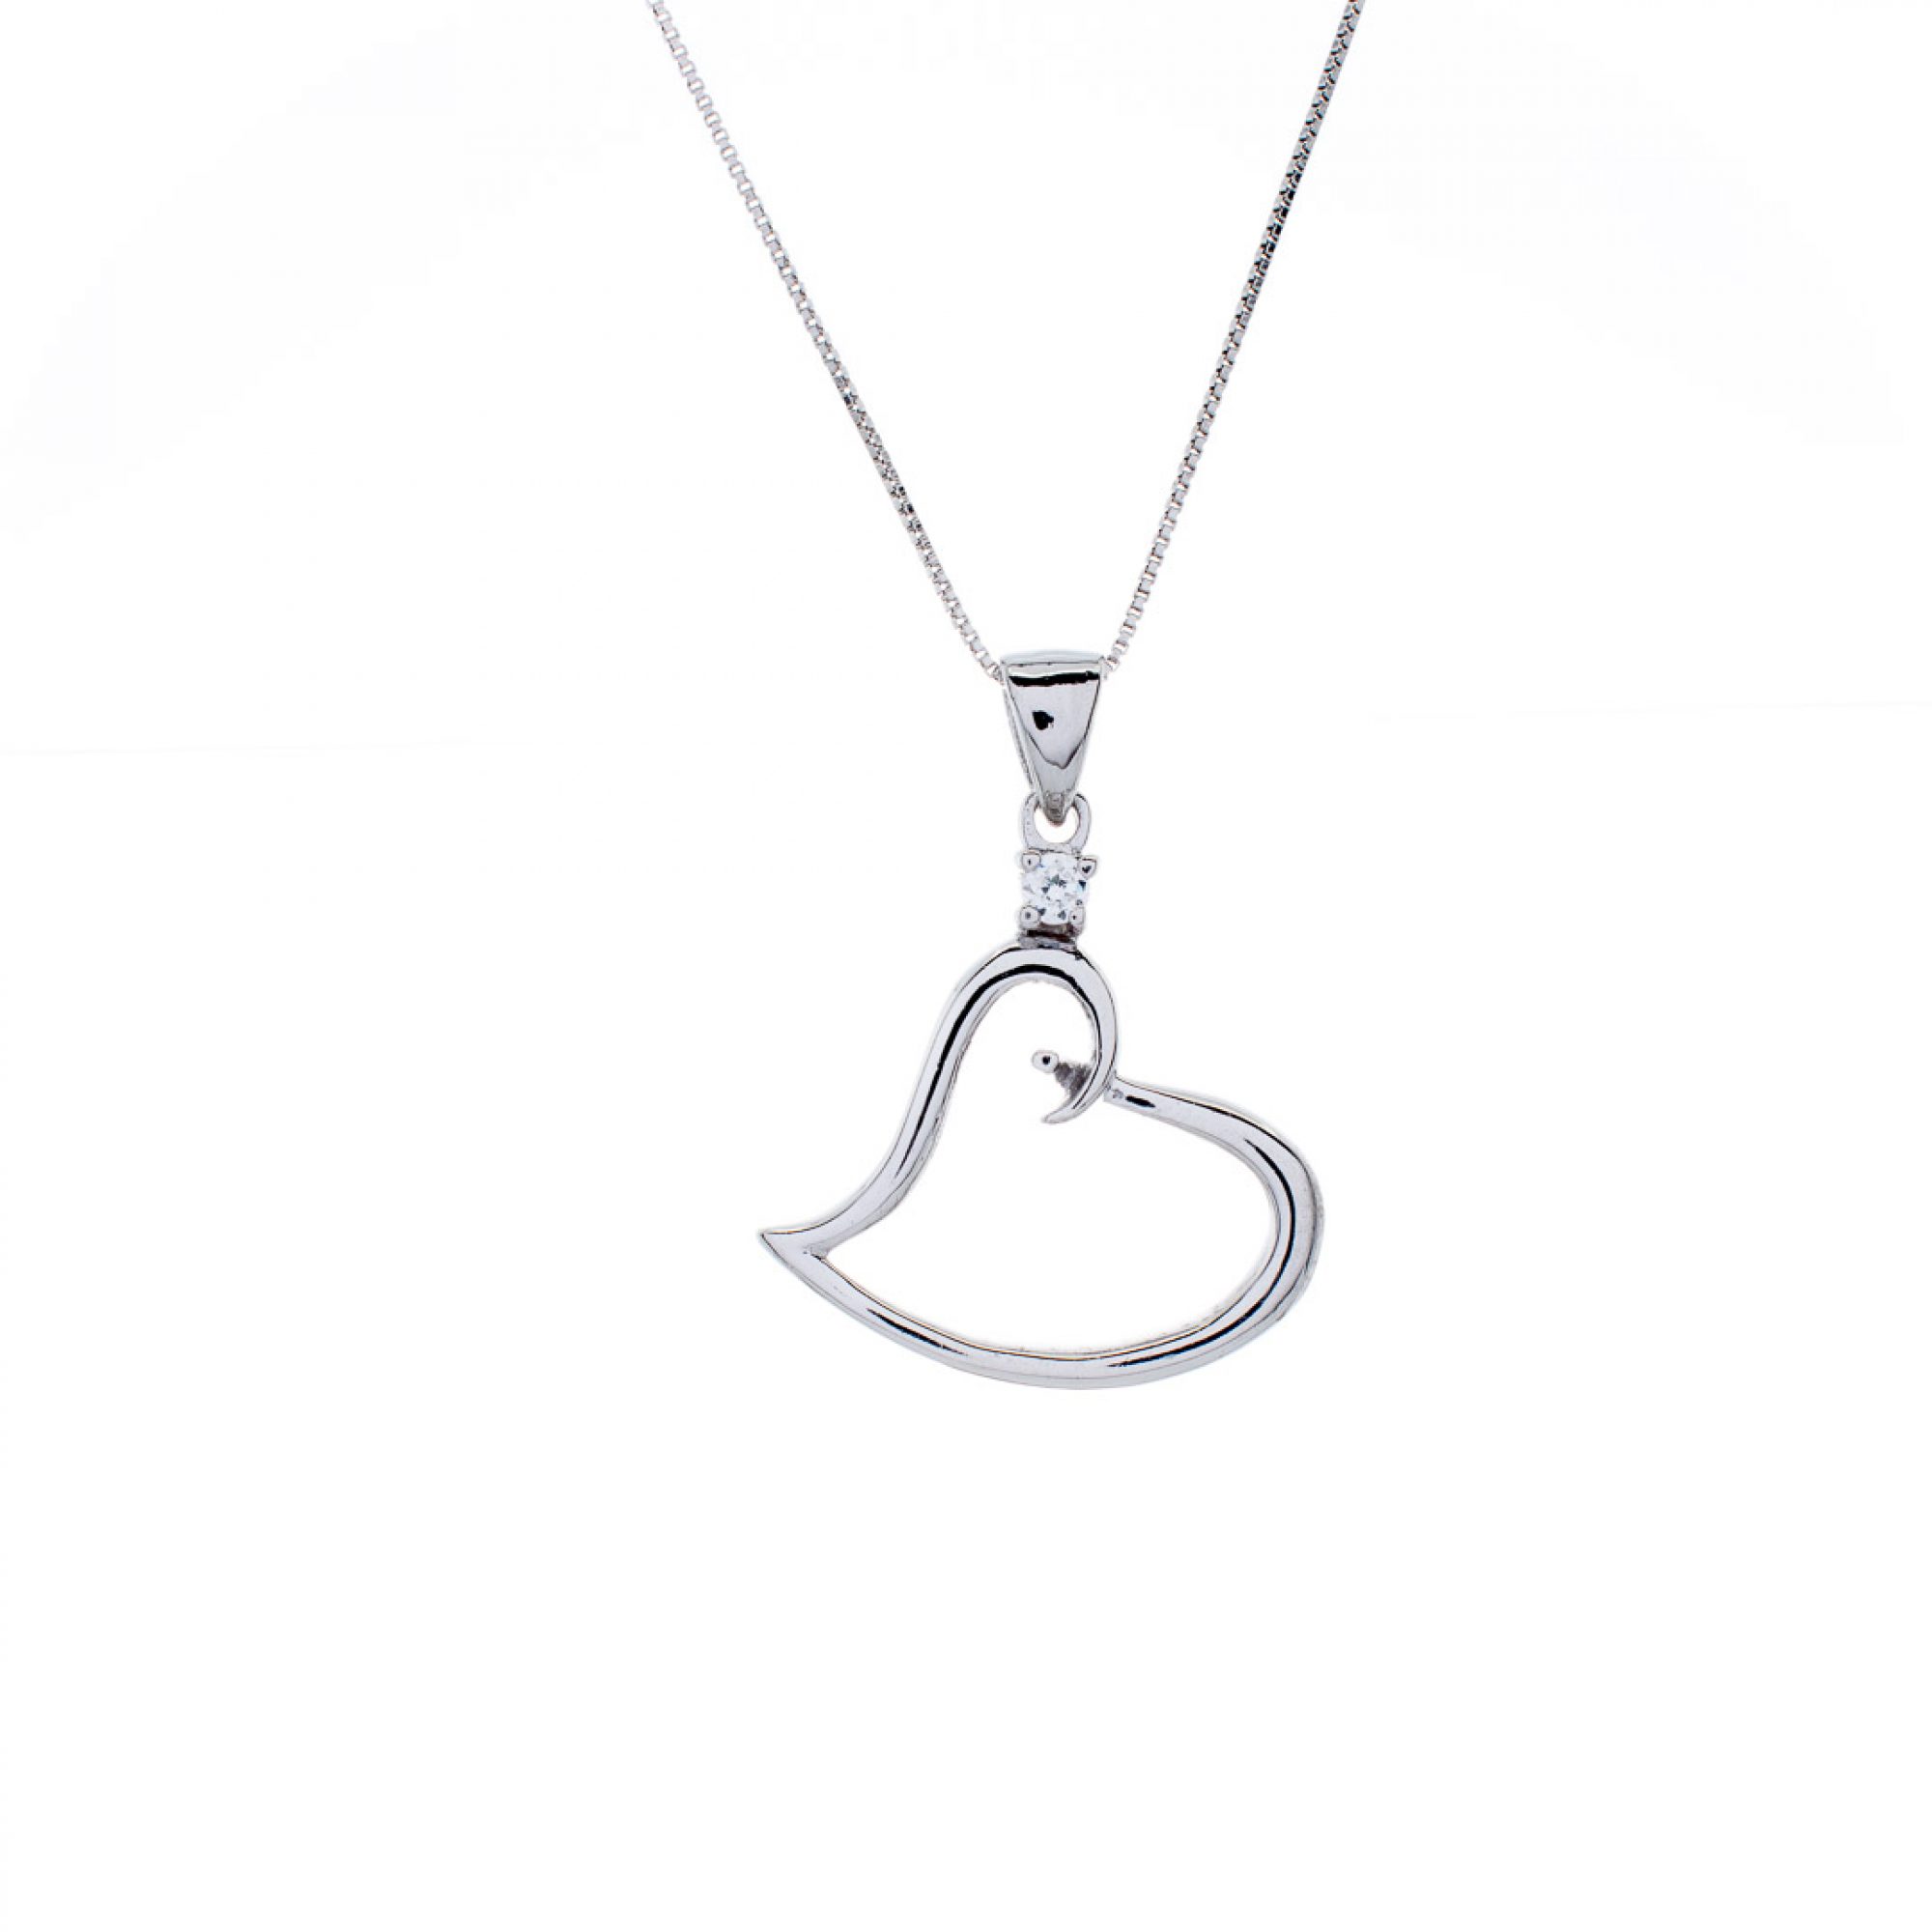 Heart necklace with zircon stone